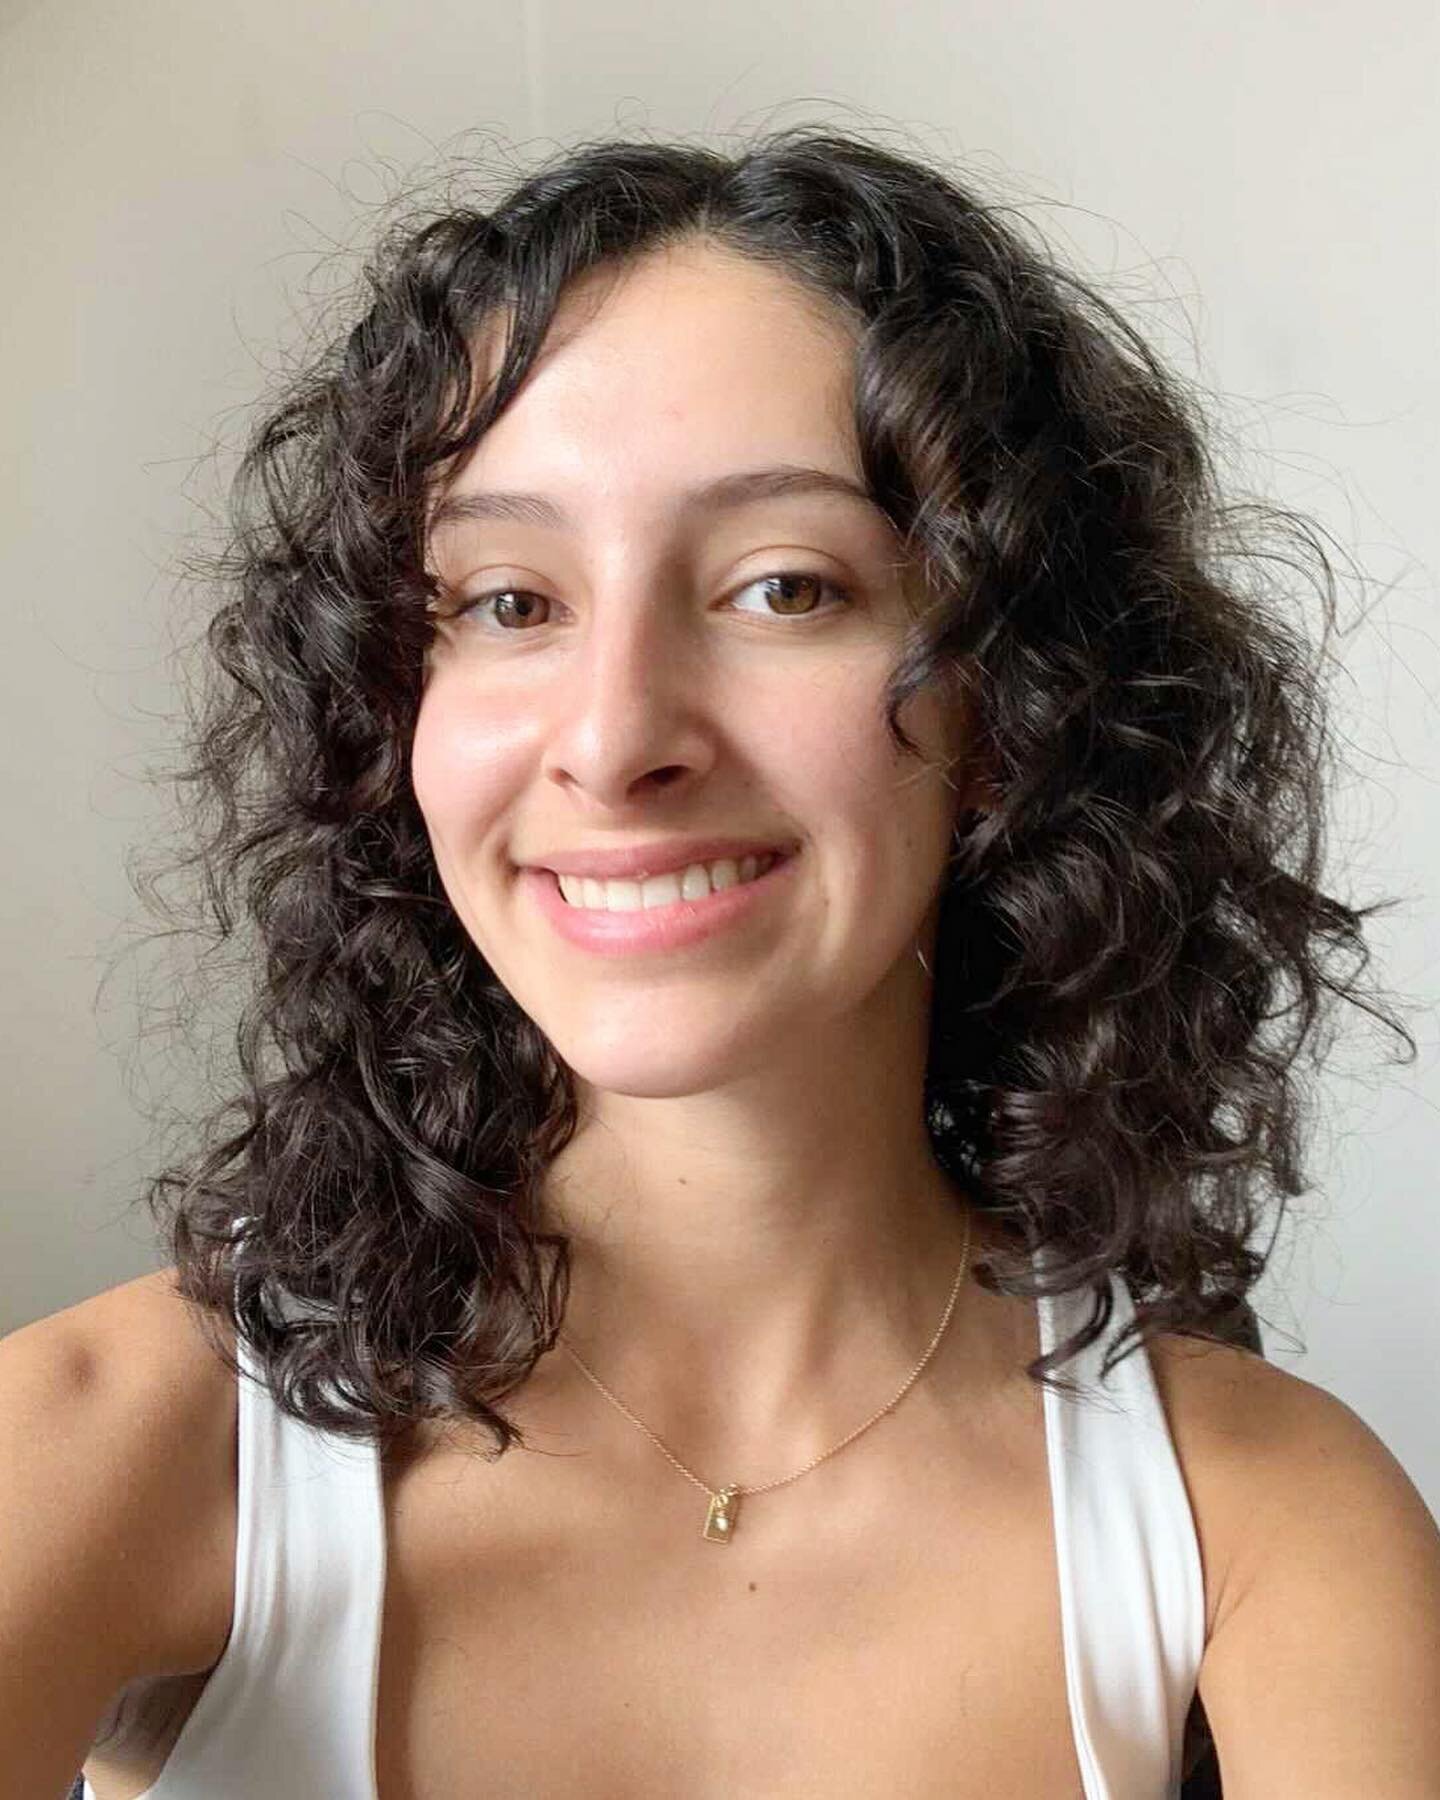 Our first curly cut  @maddyreme 💘💘 Maddy has been straitening her hair over the years and was ready to embrace her luscious curls !!
Swipe for the before 
@a_h_salon 
.
.
.
.
.
.
.
.
.
.
.
.
.
.
.
..
#curl #curlyhair #drycutting #sydneycurlyhairdre